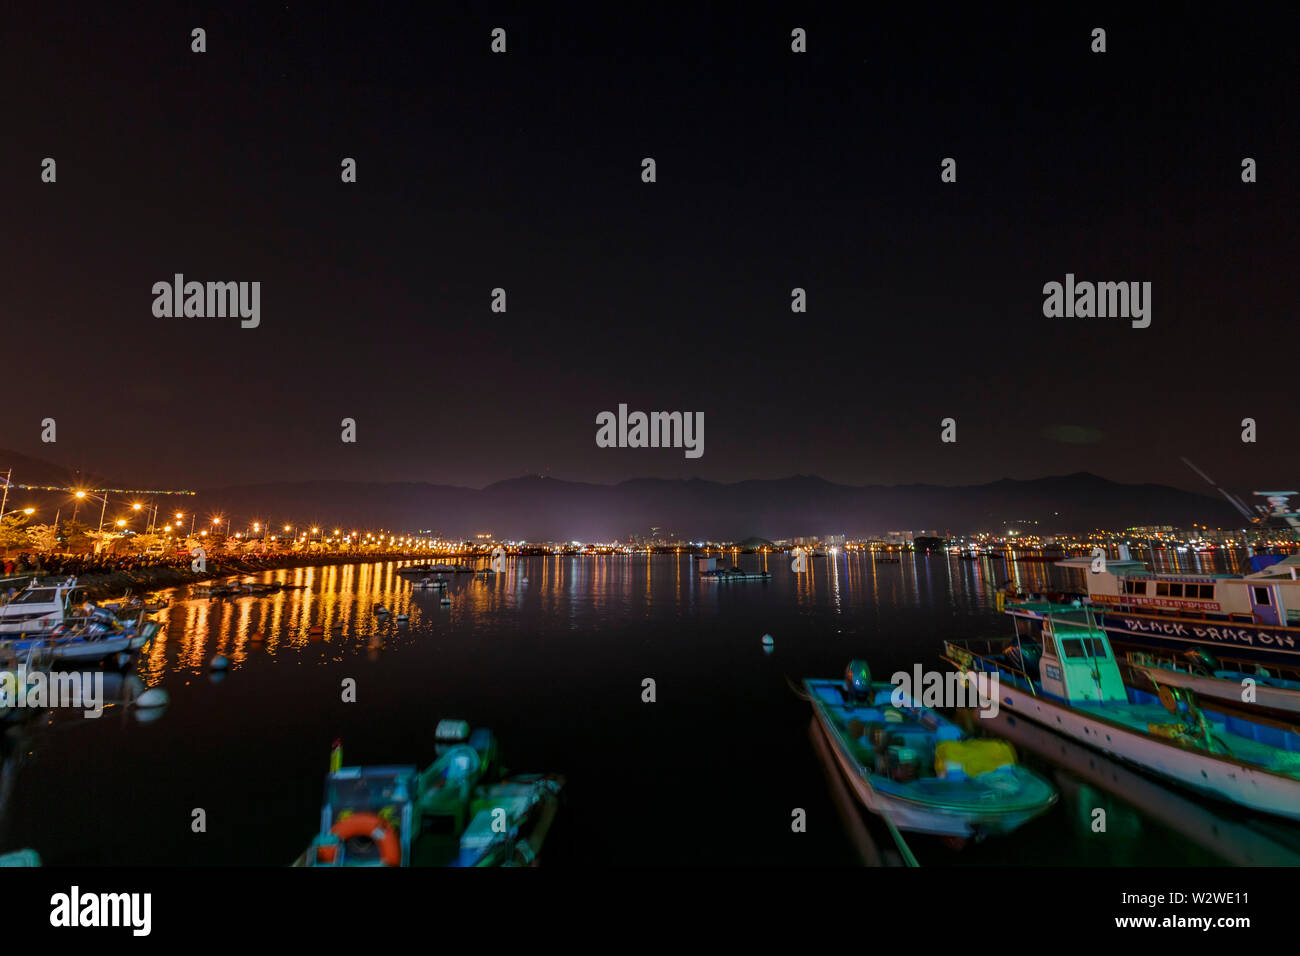 Busan, APR 2: Night view of a harbour at Jinhae on APR 2, 2014 at Busan, South Korea Stock Photo